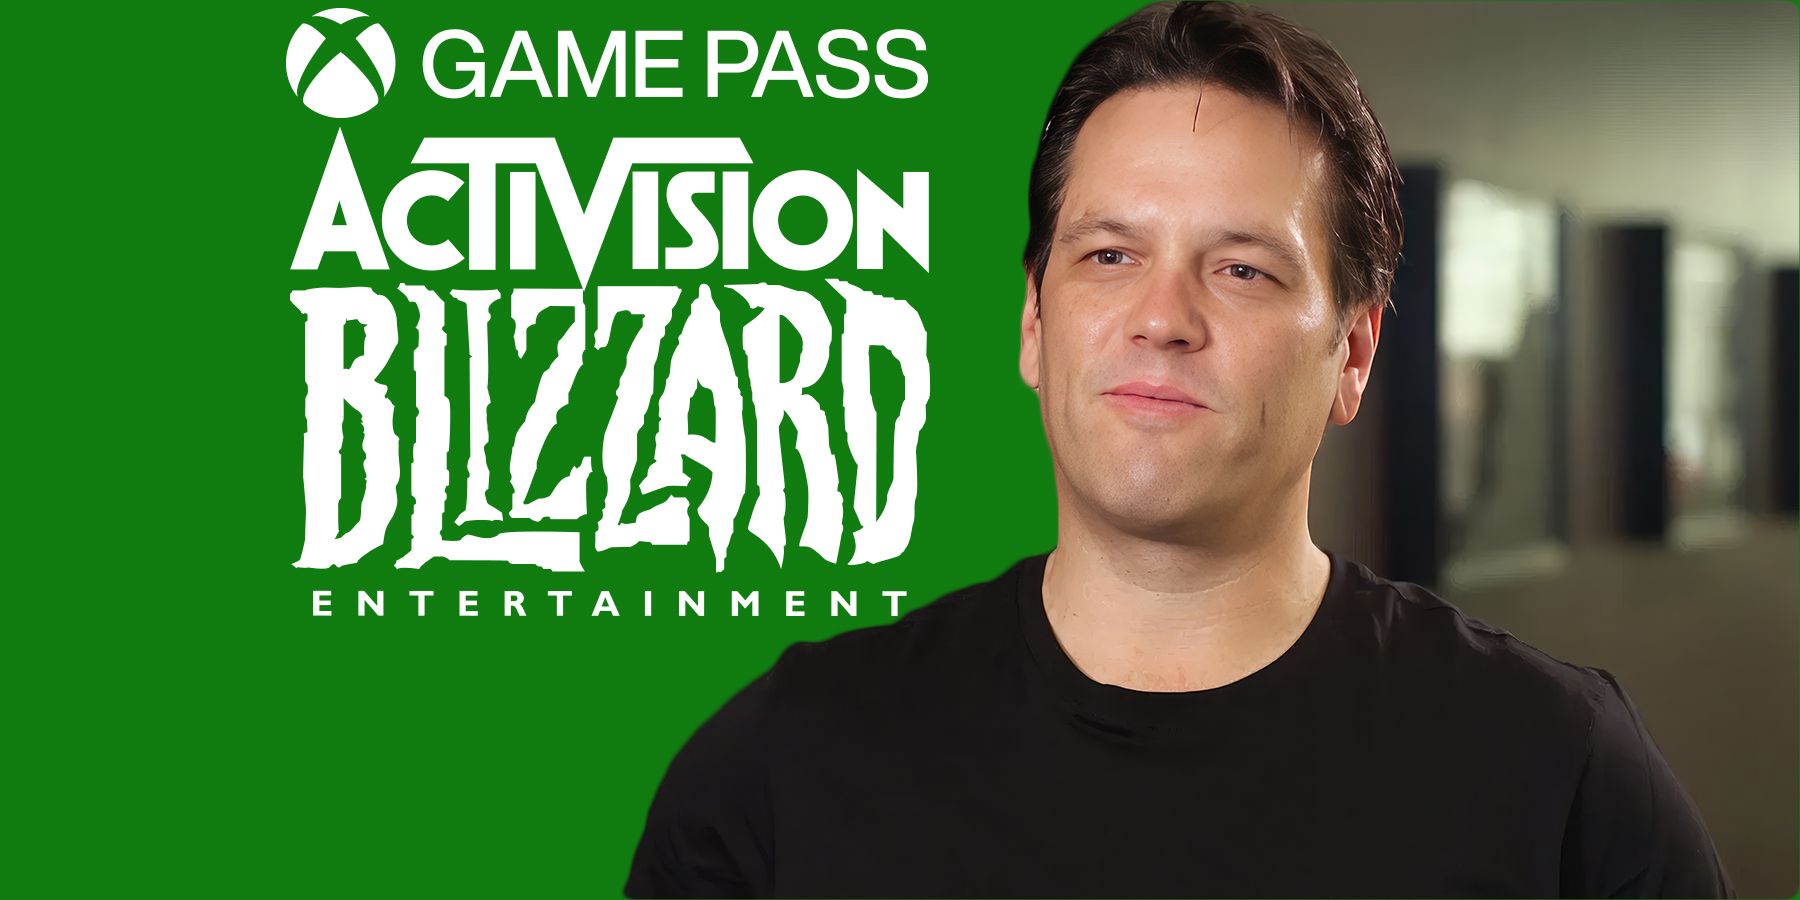 Phil Spencer in front of Xbox Game Pass Activision Blizzard logos